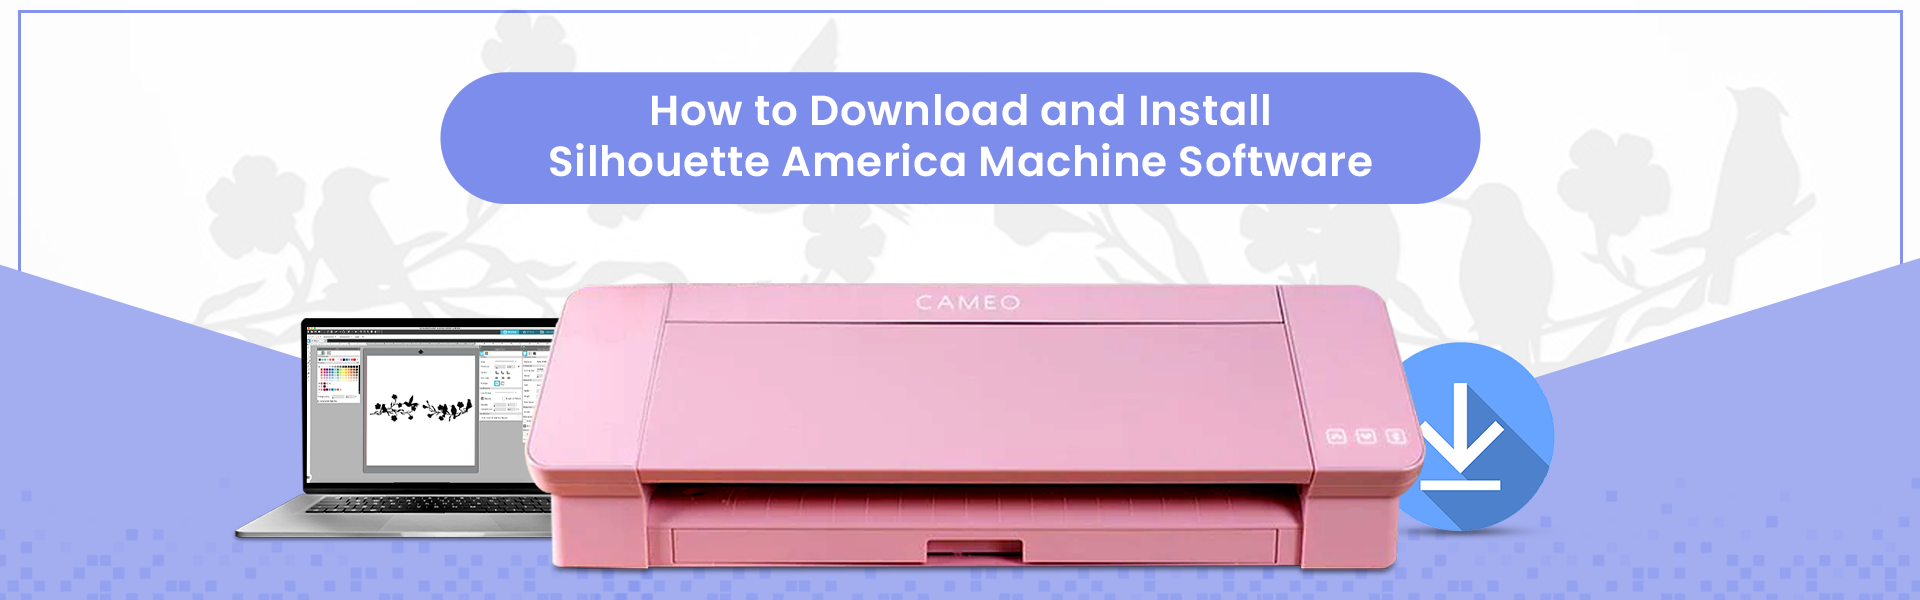 How-To-Download-And-Install-Silhouette-America-Machine-Software